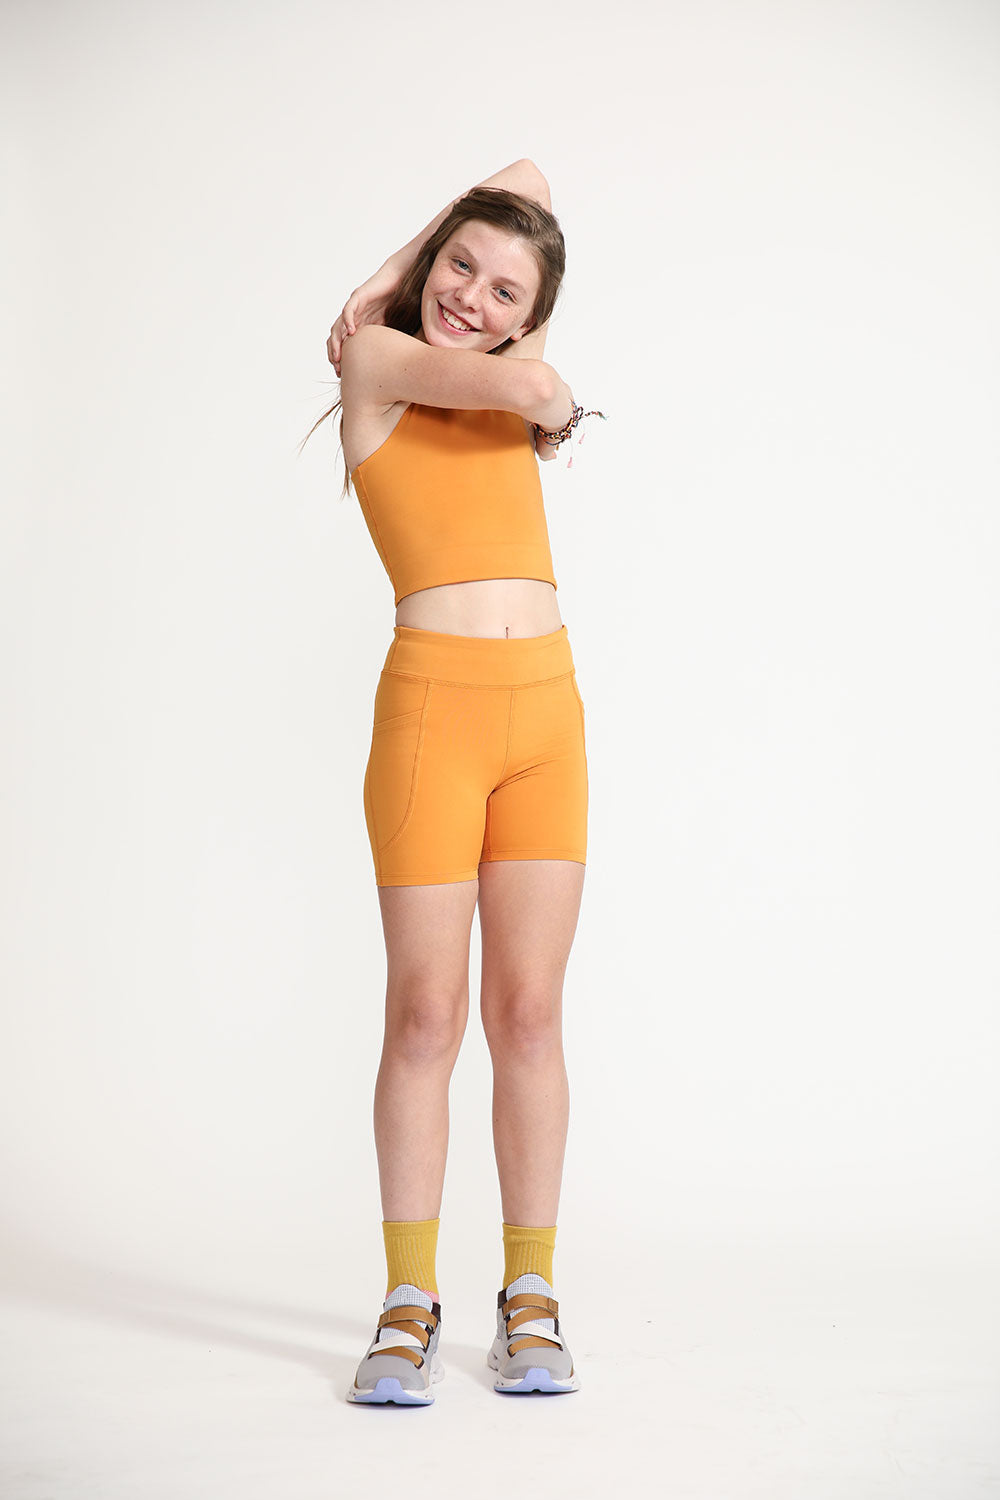 Young girl wearing Everyway kids activewear. Featuring Cycle Shorts in Inca Gold.